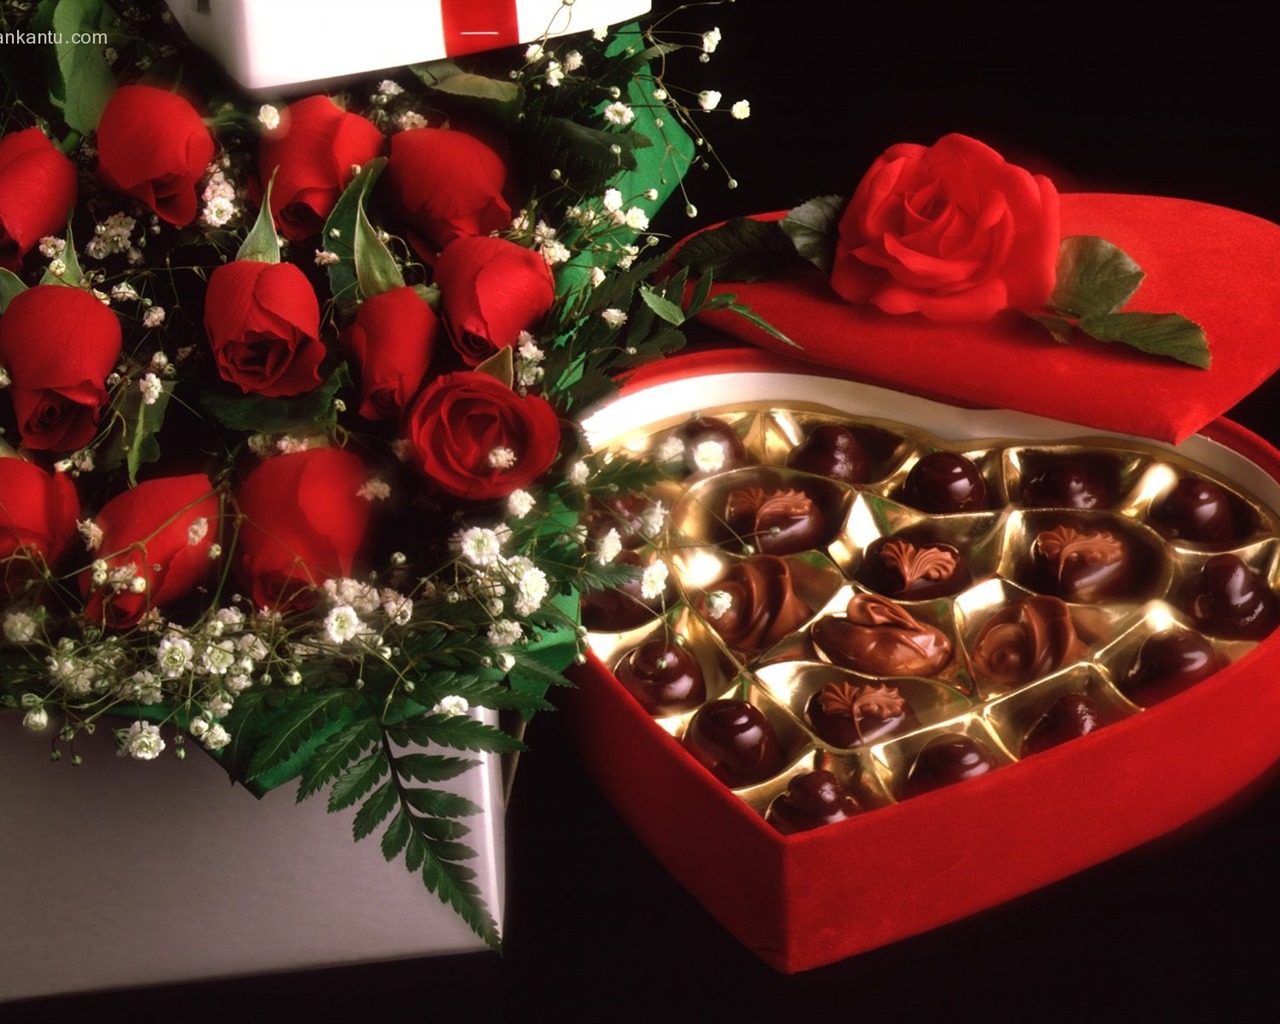 The indelible Valentine's Day Chocolate #4 - 1280x1024